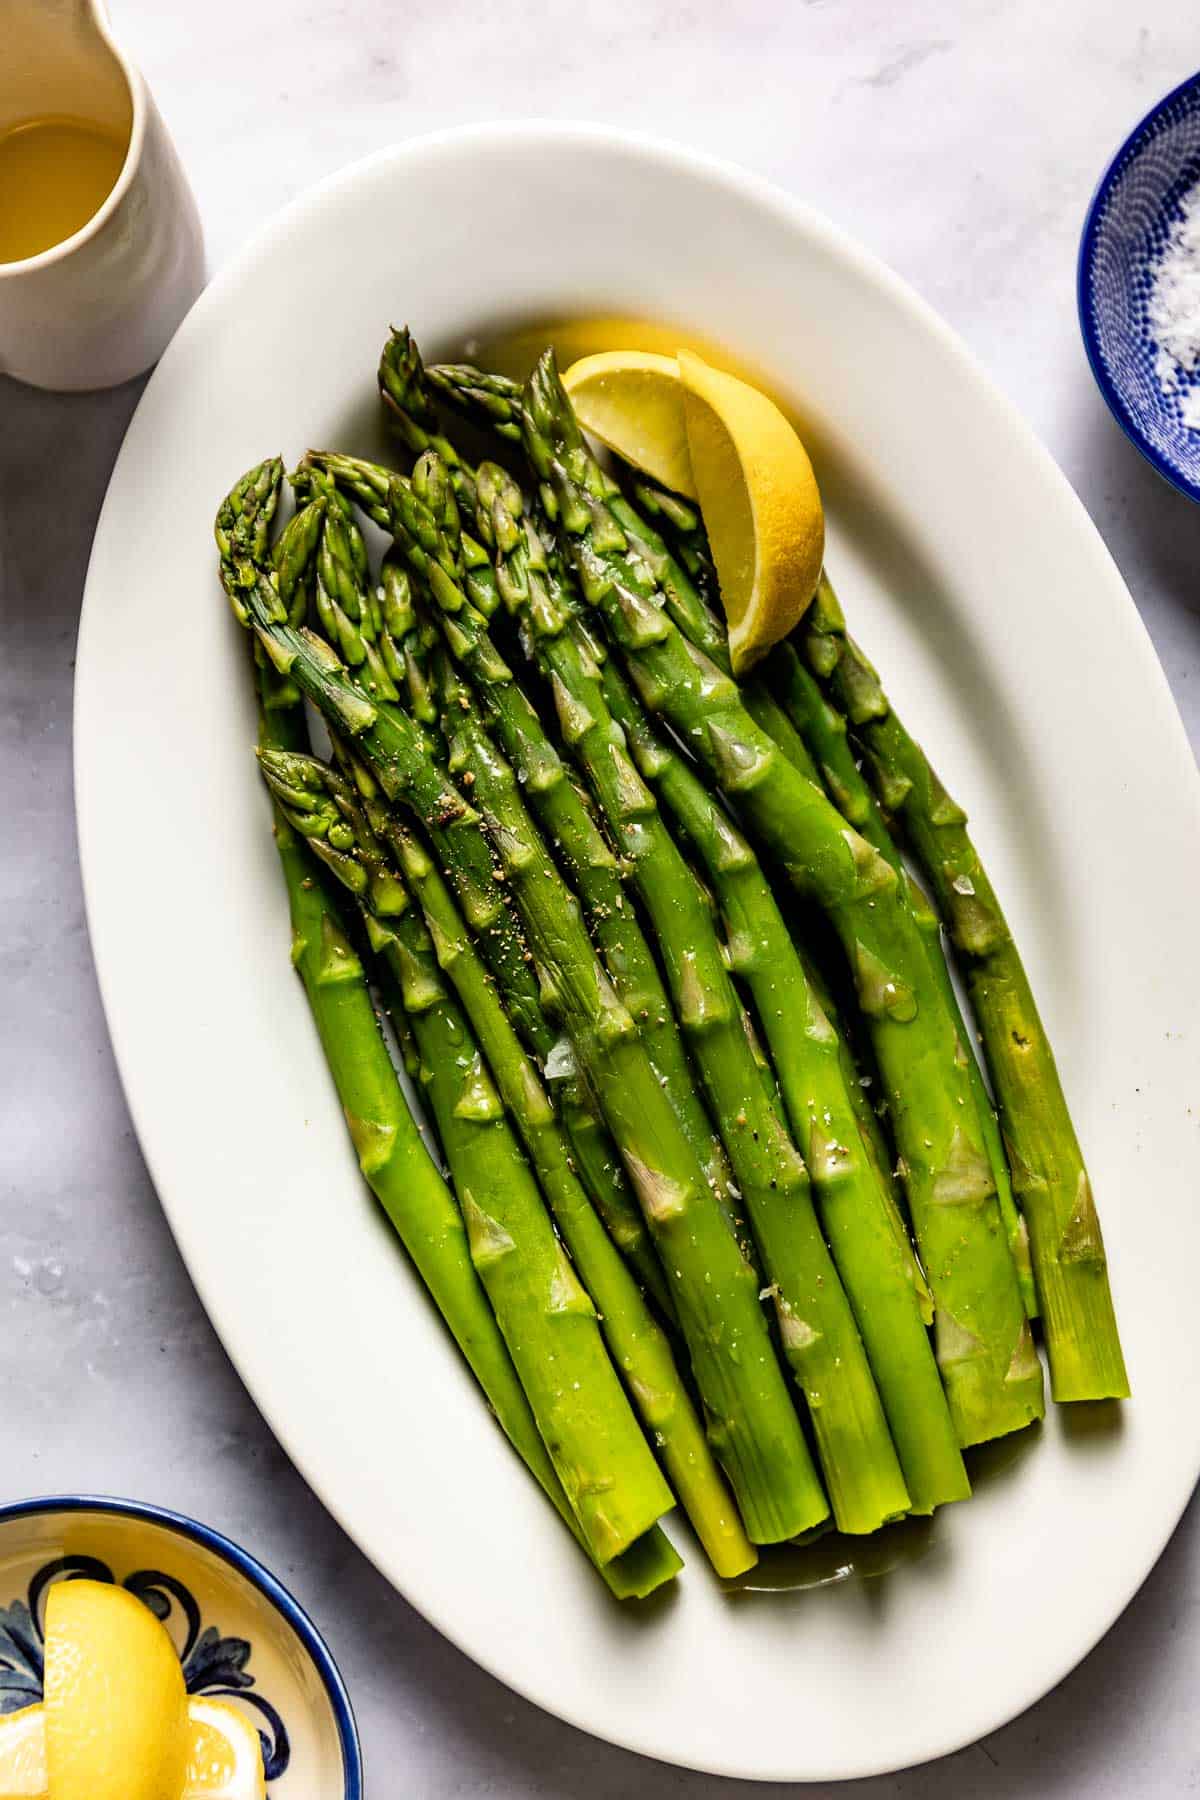 Steamed asparagus on a plated garnished with lemon wedges.